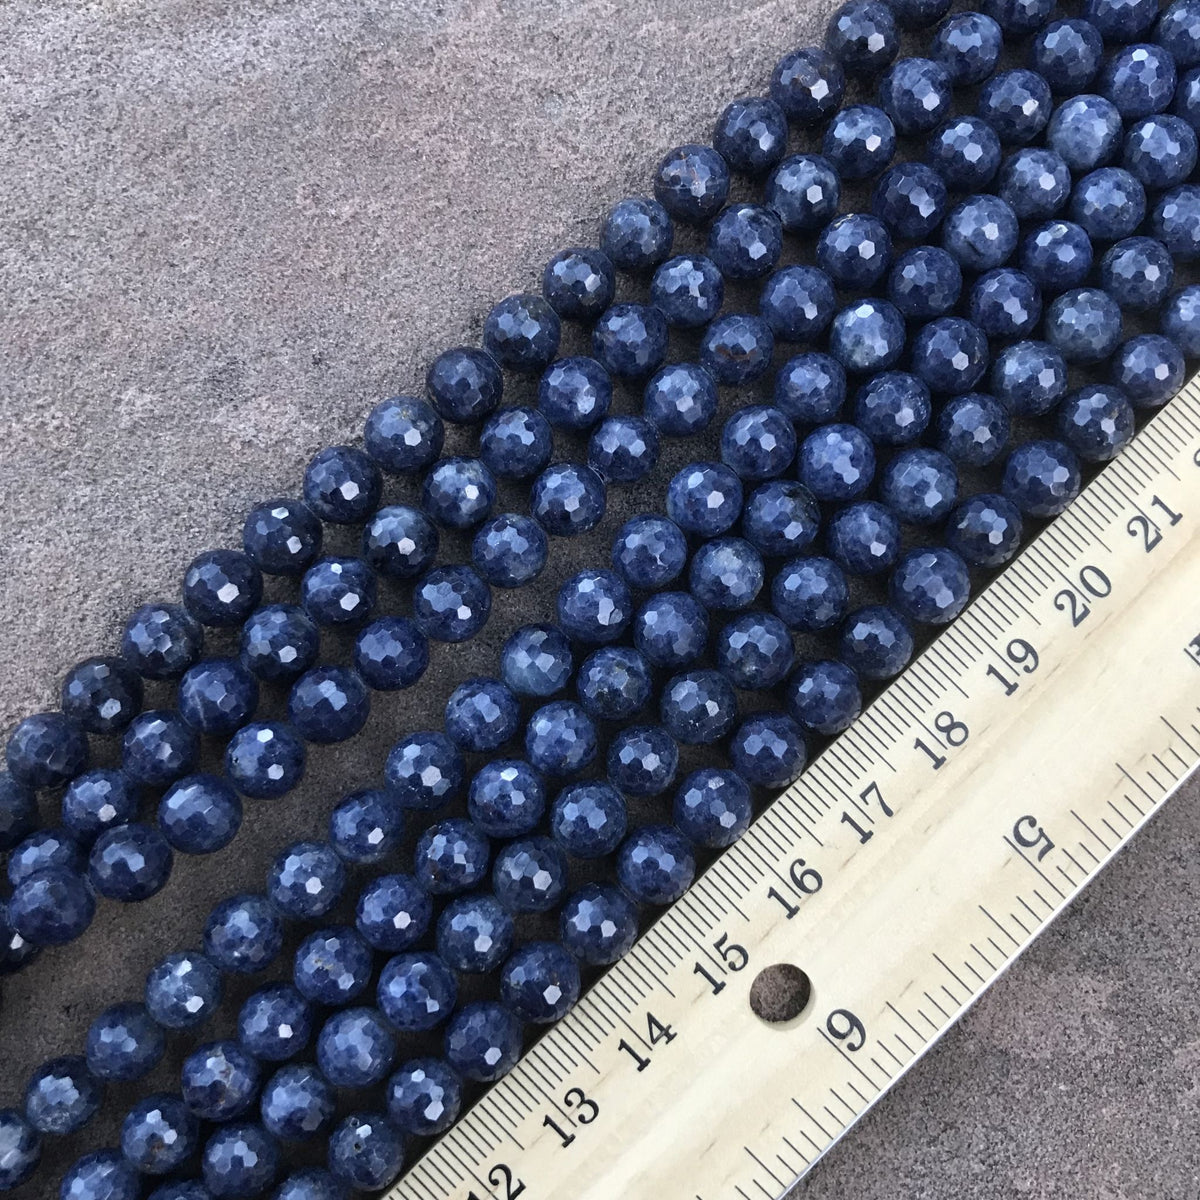 Blue Sapphire 5-8mm Smooth Rondelle Shape A Grade Multi Strand Beads Necklace - Total 2 Strands of 18-19 inch.